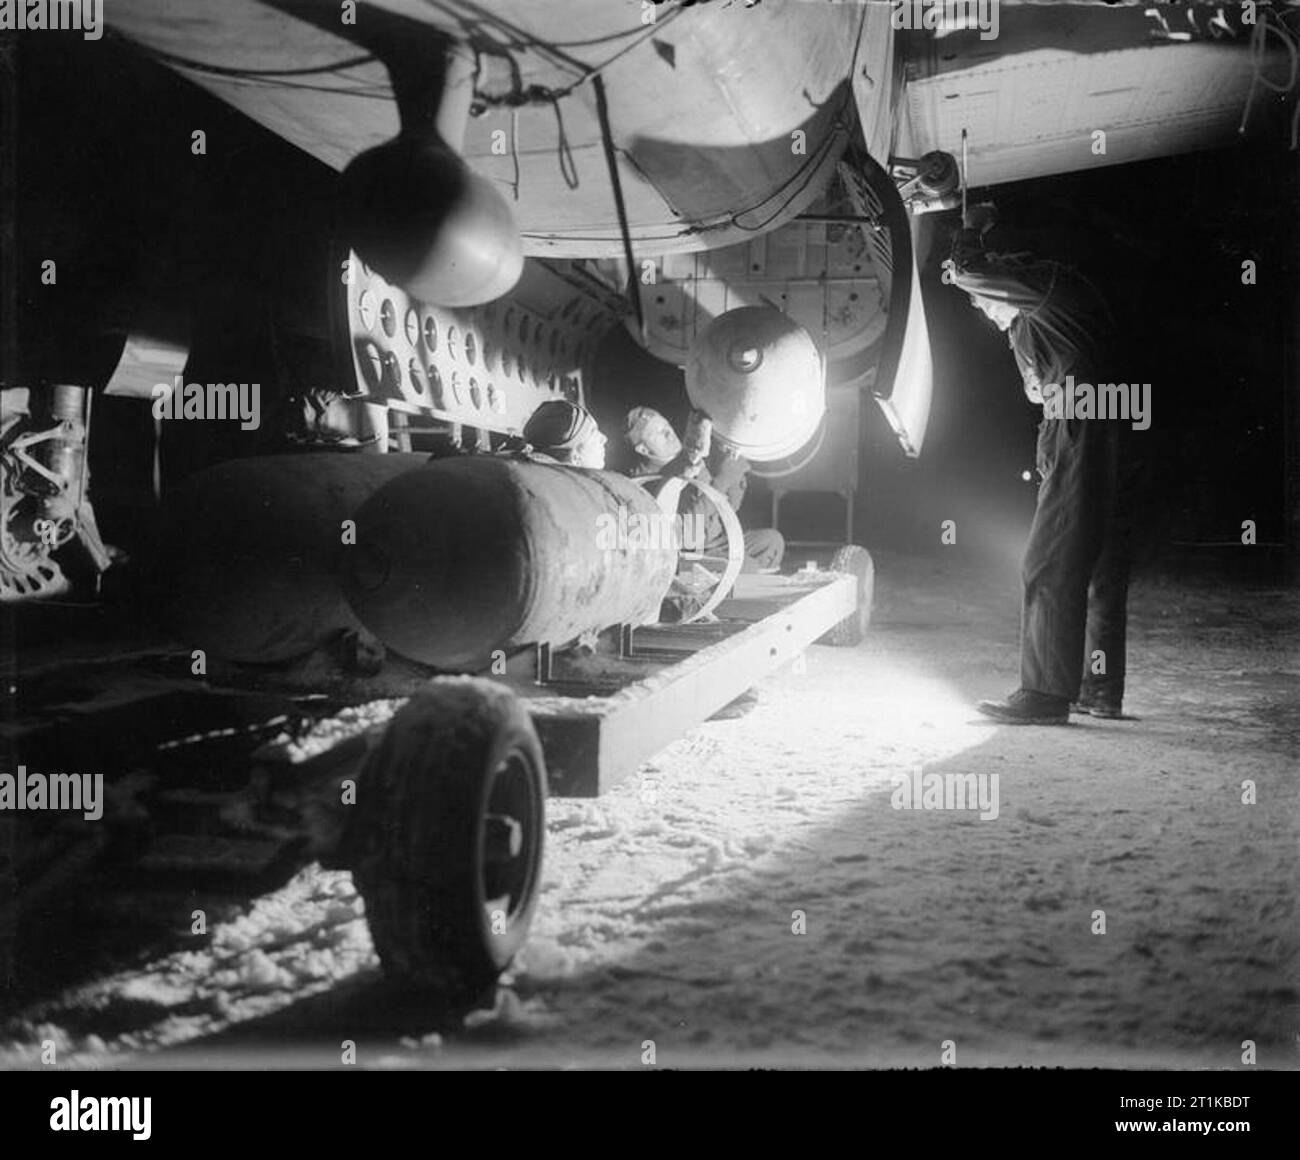 Royal Air Force- 2nd Tactical Air Force, 1943-1945. In the bitter cold and snow of a January night, armourers load four 1,000-lb MC bombs into the bomb-bay of a North American Mitchell of No. 139 Wing, No. 2 Group, for an early morning sortie from B58/ Melsbroek, Belgium. Stock Photo